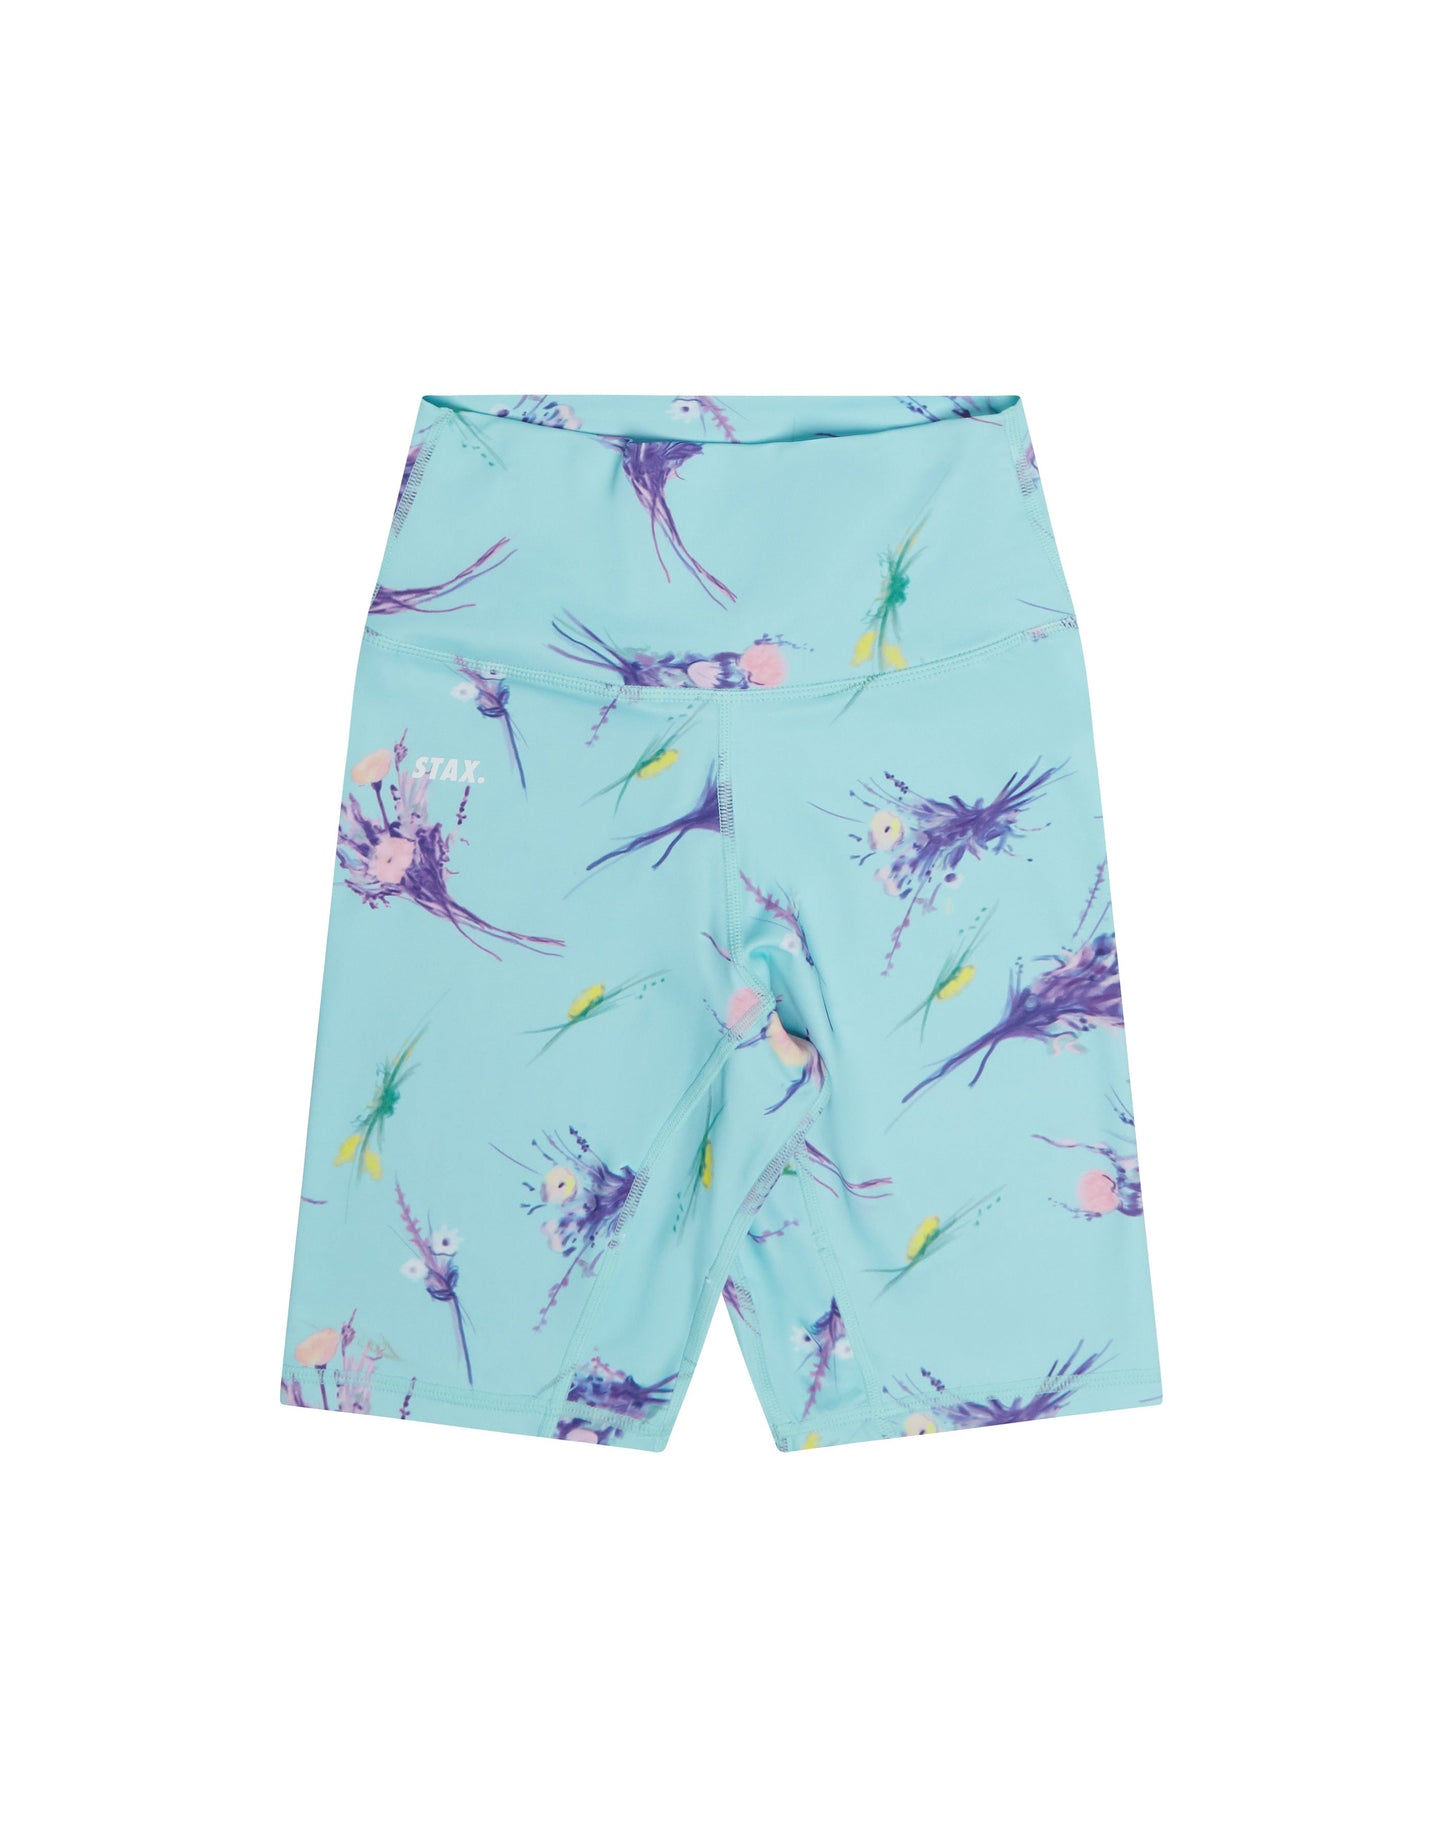 STAX. Spring Collection Bike Shorts - Periwinkle